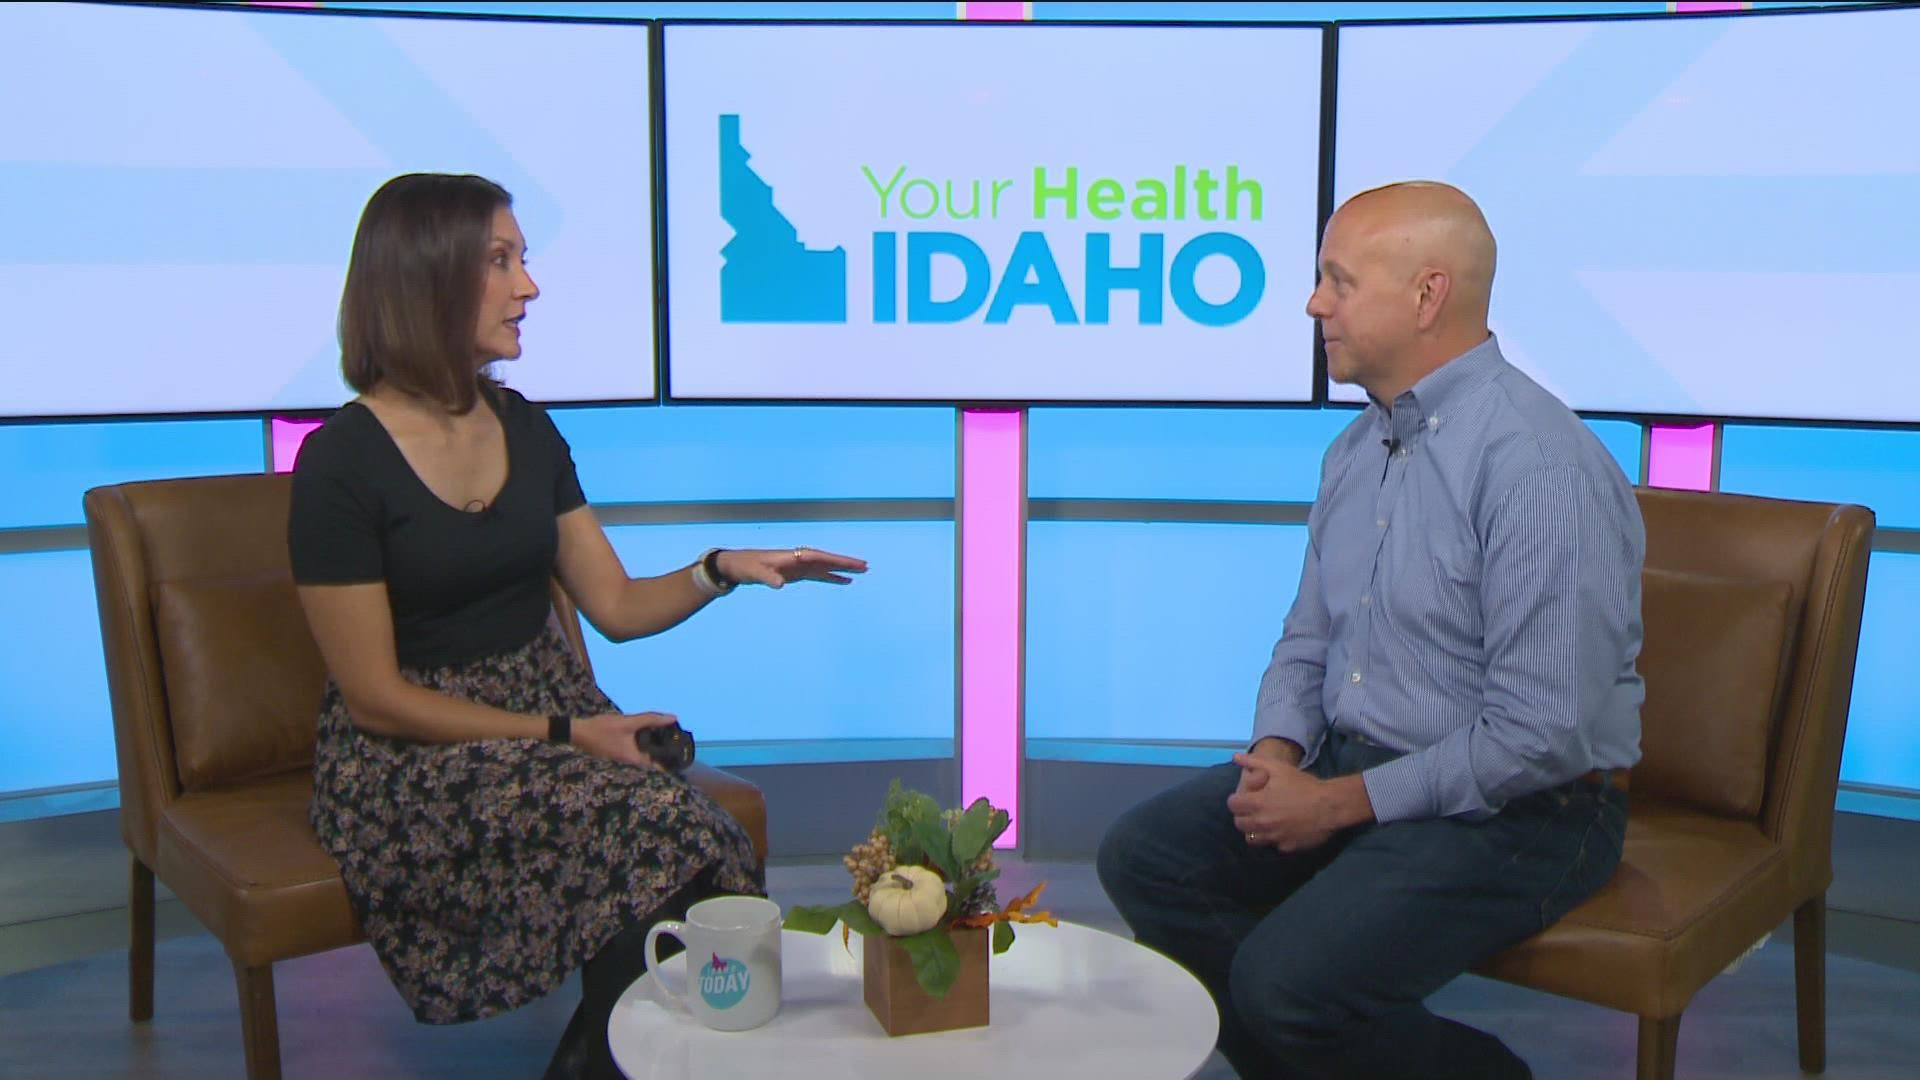 Sponsored by Your Health Idaho. Open enrollment is here, open until December 15th for 2023. Visit https://www.yourhealthidaho.org/